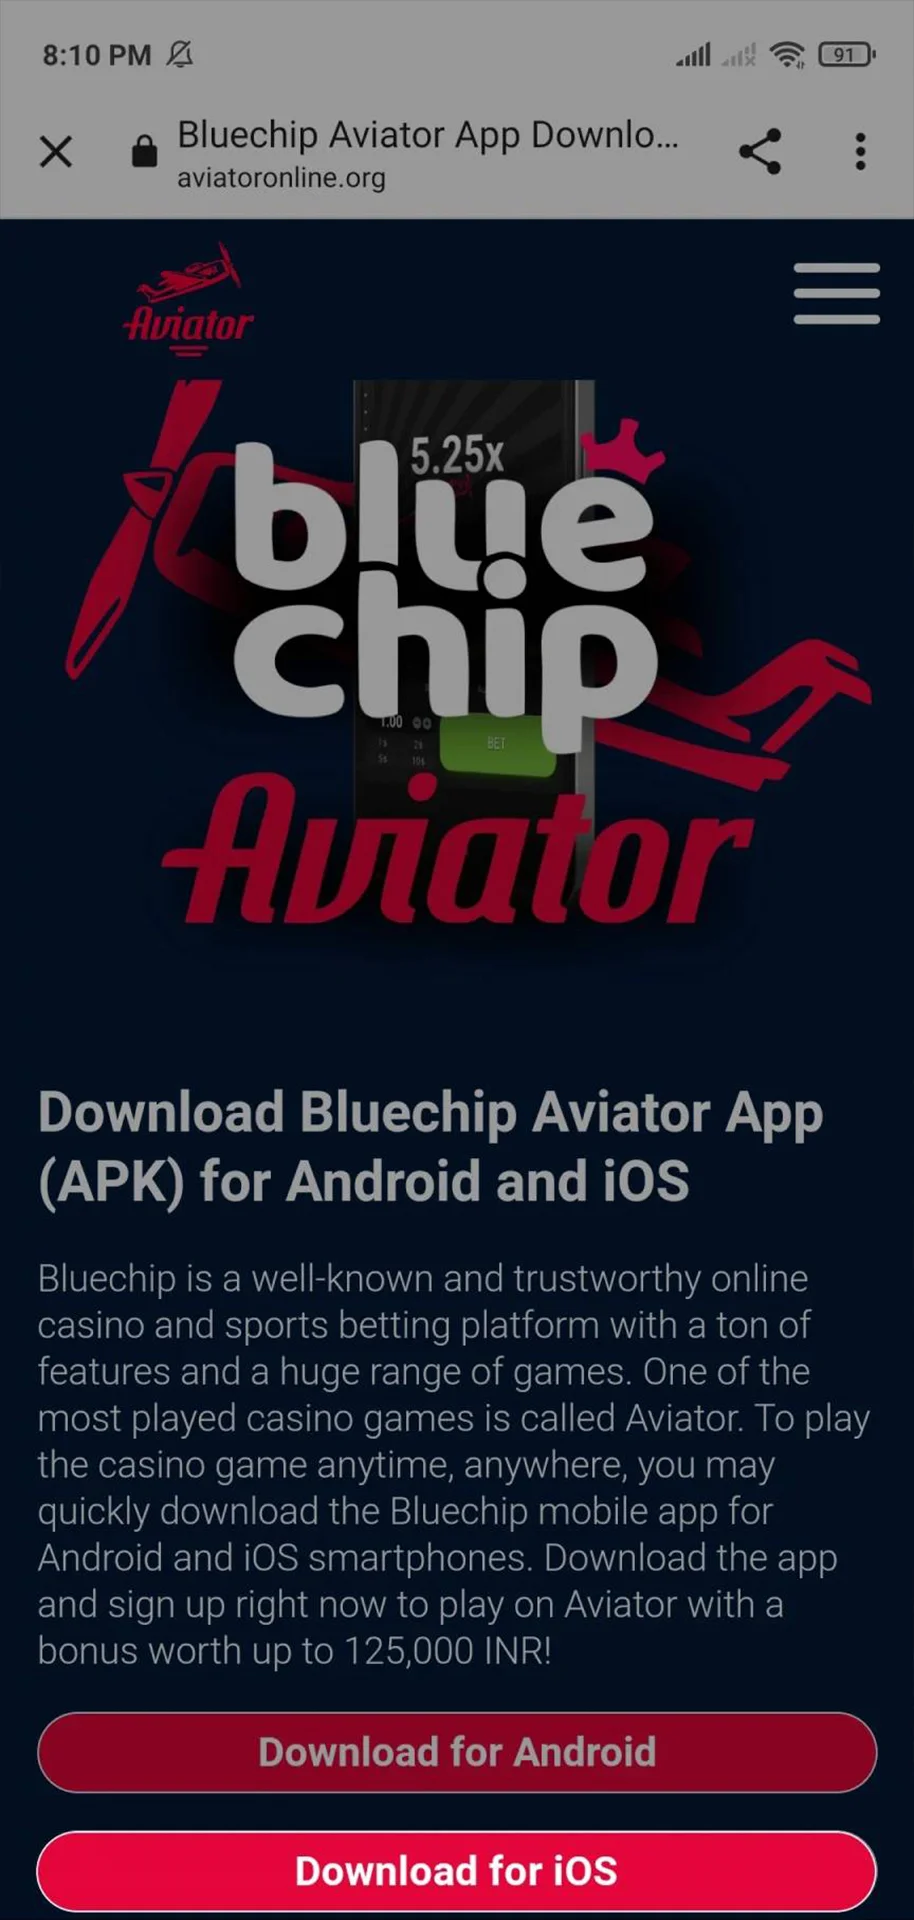 Follow the link to download the Bluechip app for iOS.